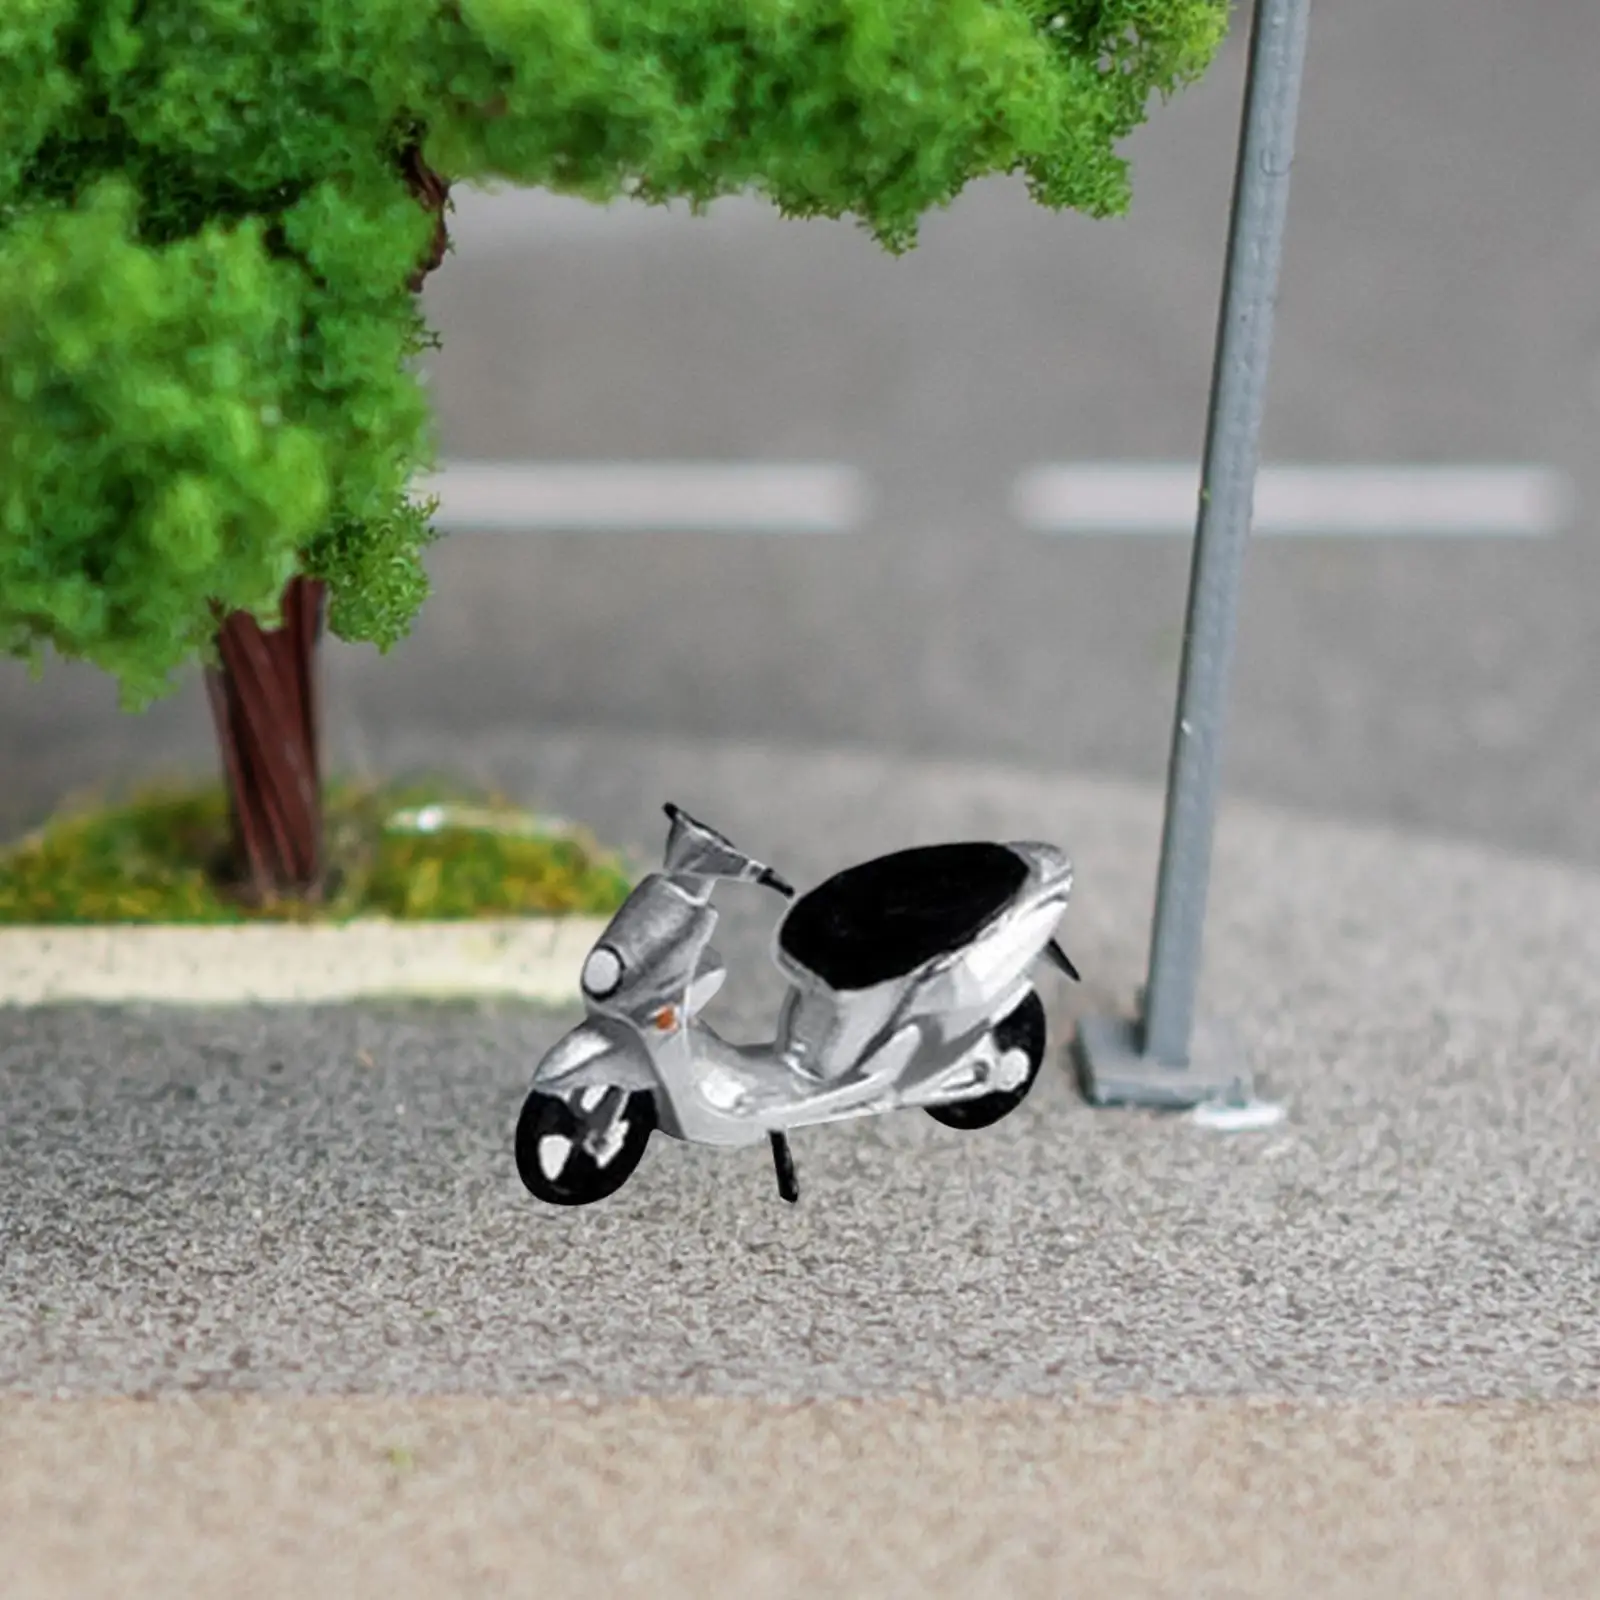 1/64 Motorcycle Model Figure Simulation Sand Table Ornament Miniature Doll Model for Dollhouse Miniature Scene Layout Decoration